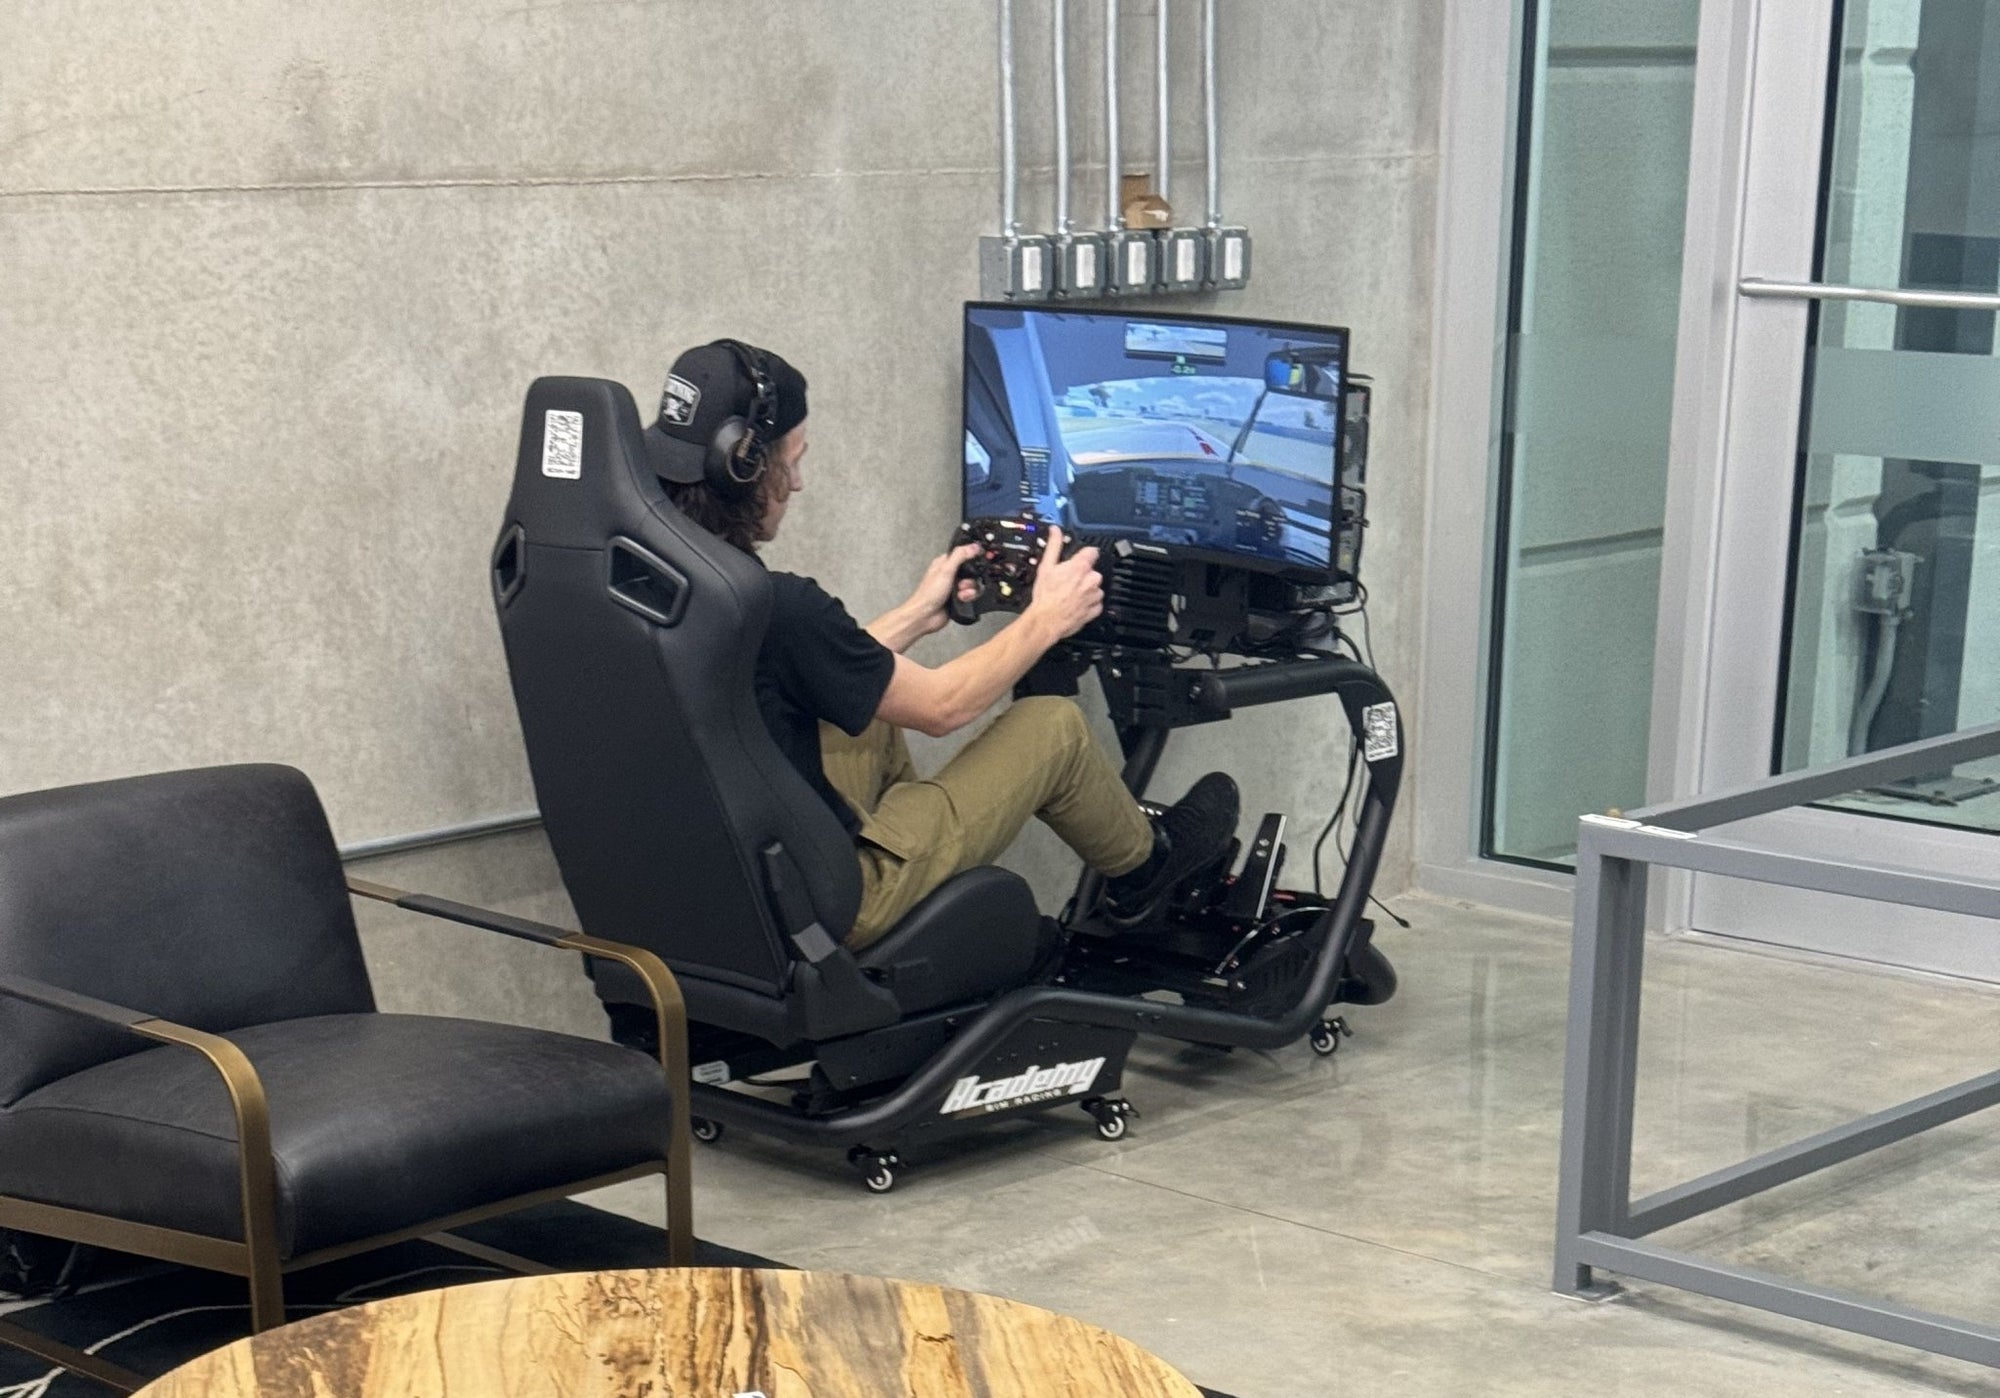 Academy Sim Racing IS Changing the School Driving Simulator Game for the better - Alliance HPDE Academy